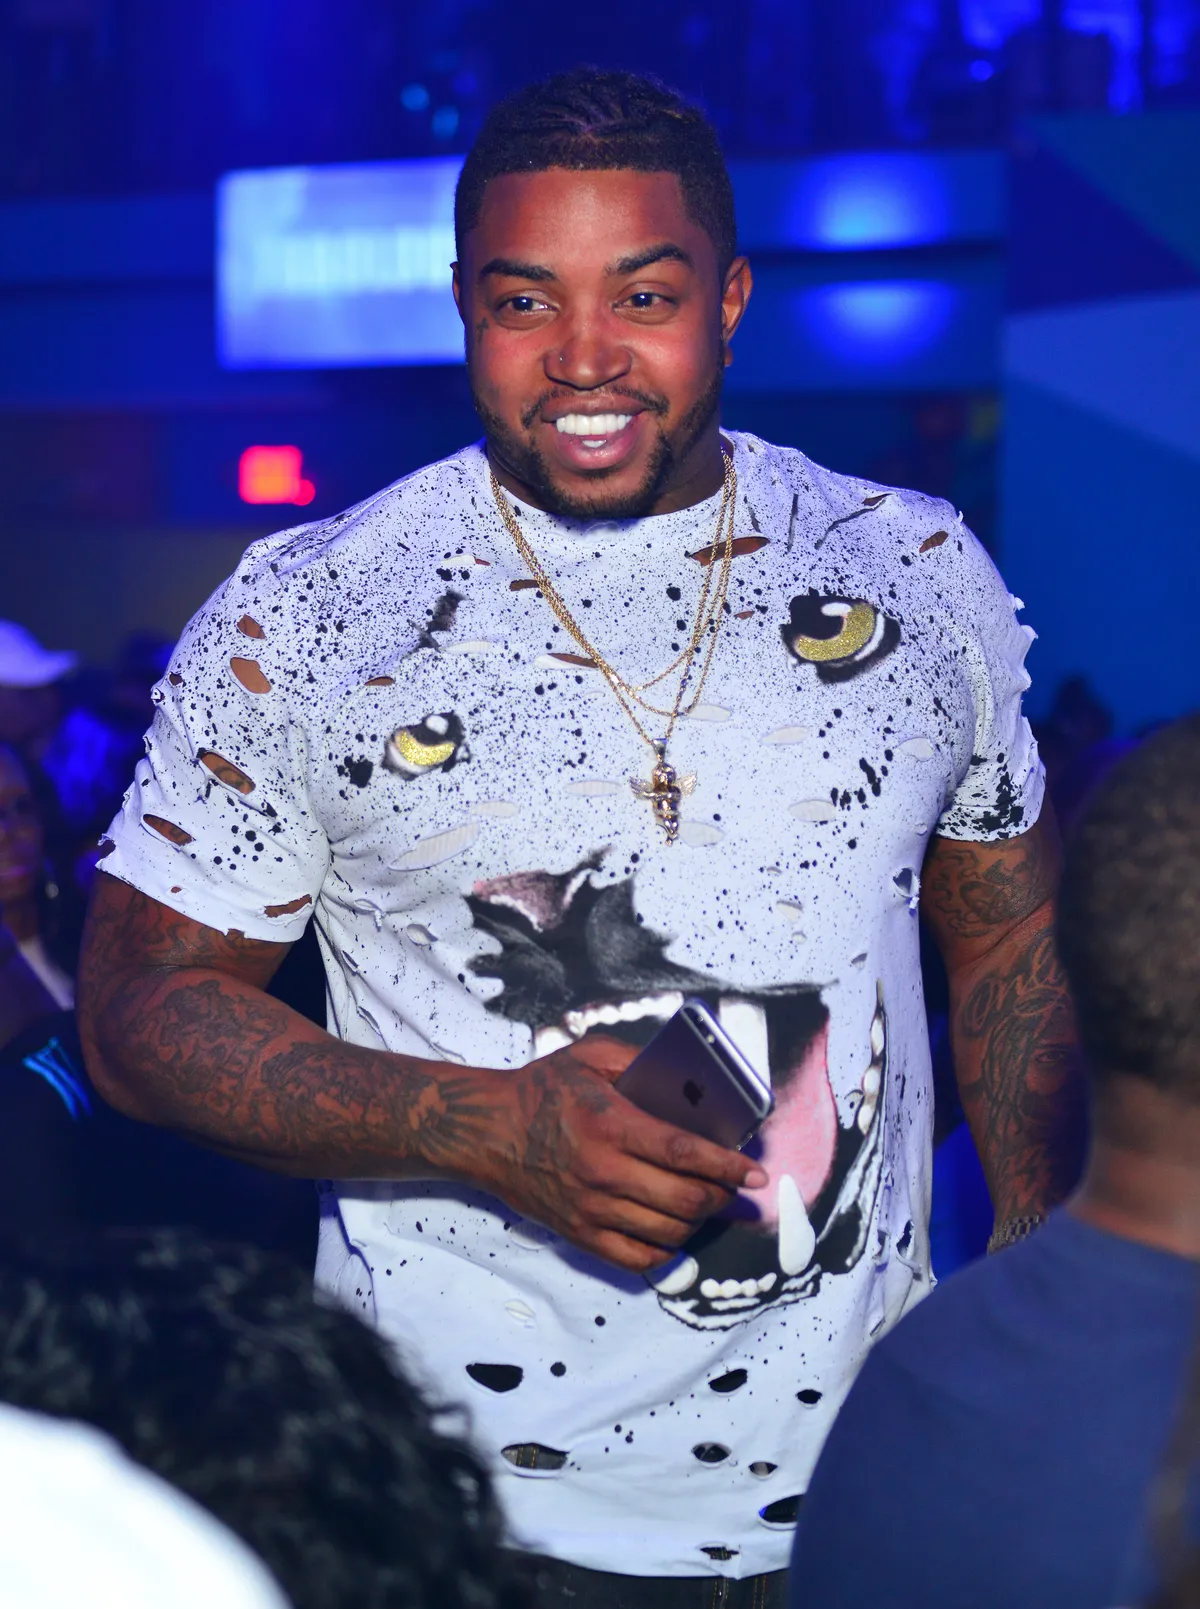 Lil Scrappy attends the BET Hip Hop Awards 2016 at XS Lounge on September 19, 2016 in Atlanta, Georgia. | Photo: Getty Images